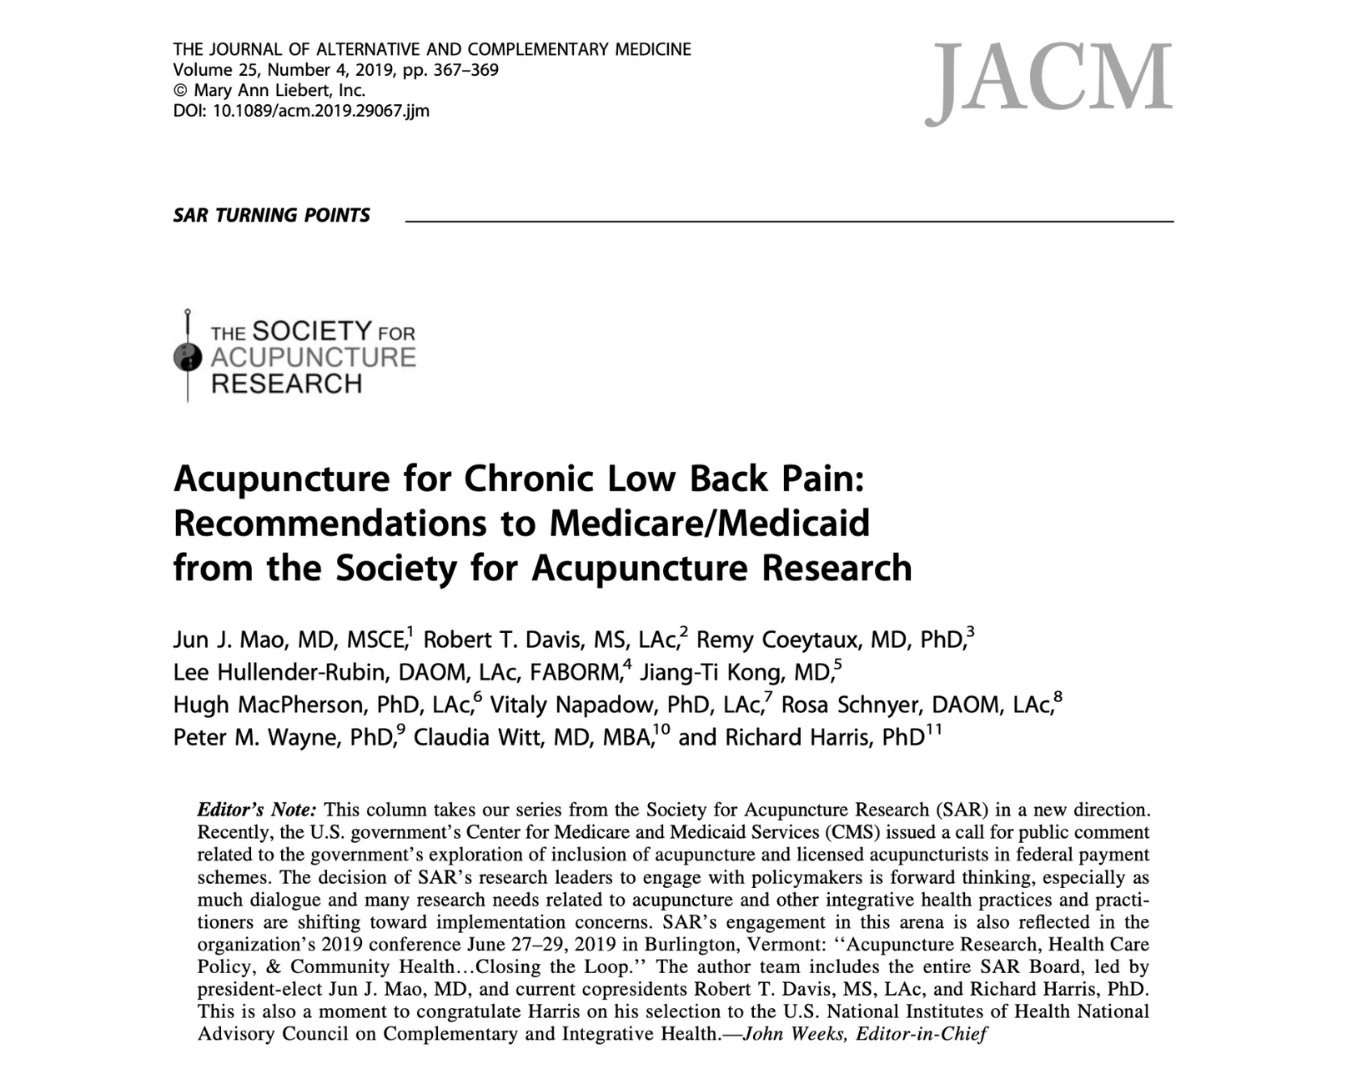 Acupuncture for Chronic Low Back Pain: Recommendations to Medicare/Medicaid from the Society for Acupuncture Research